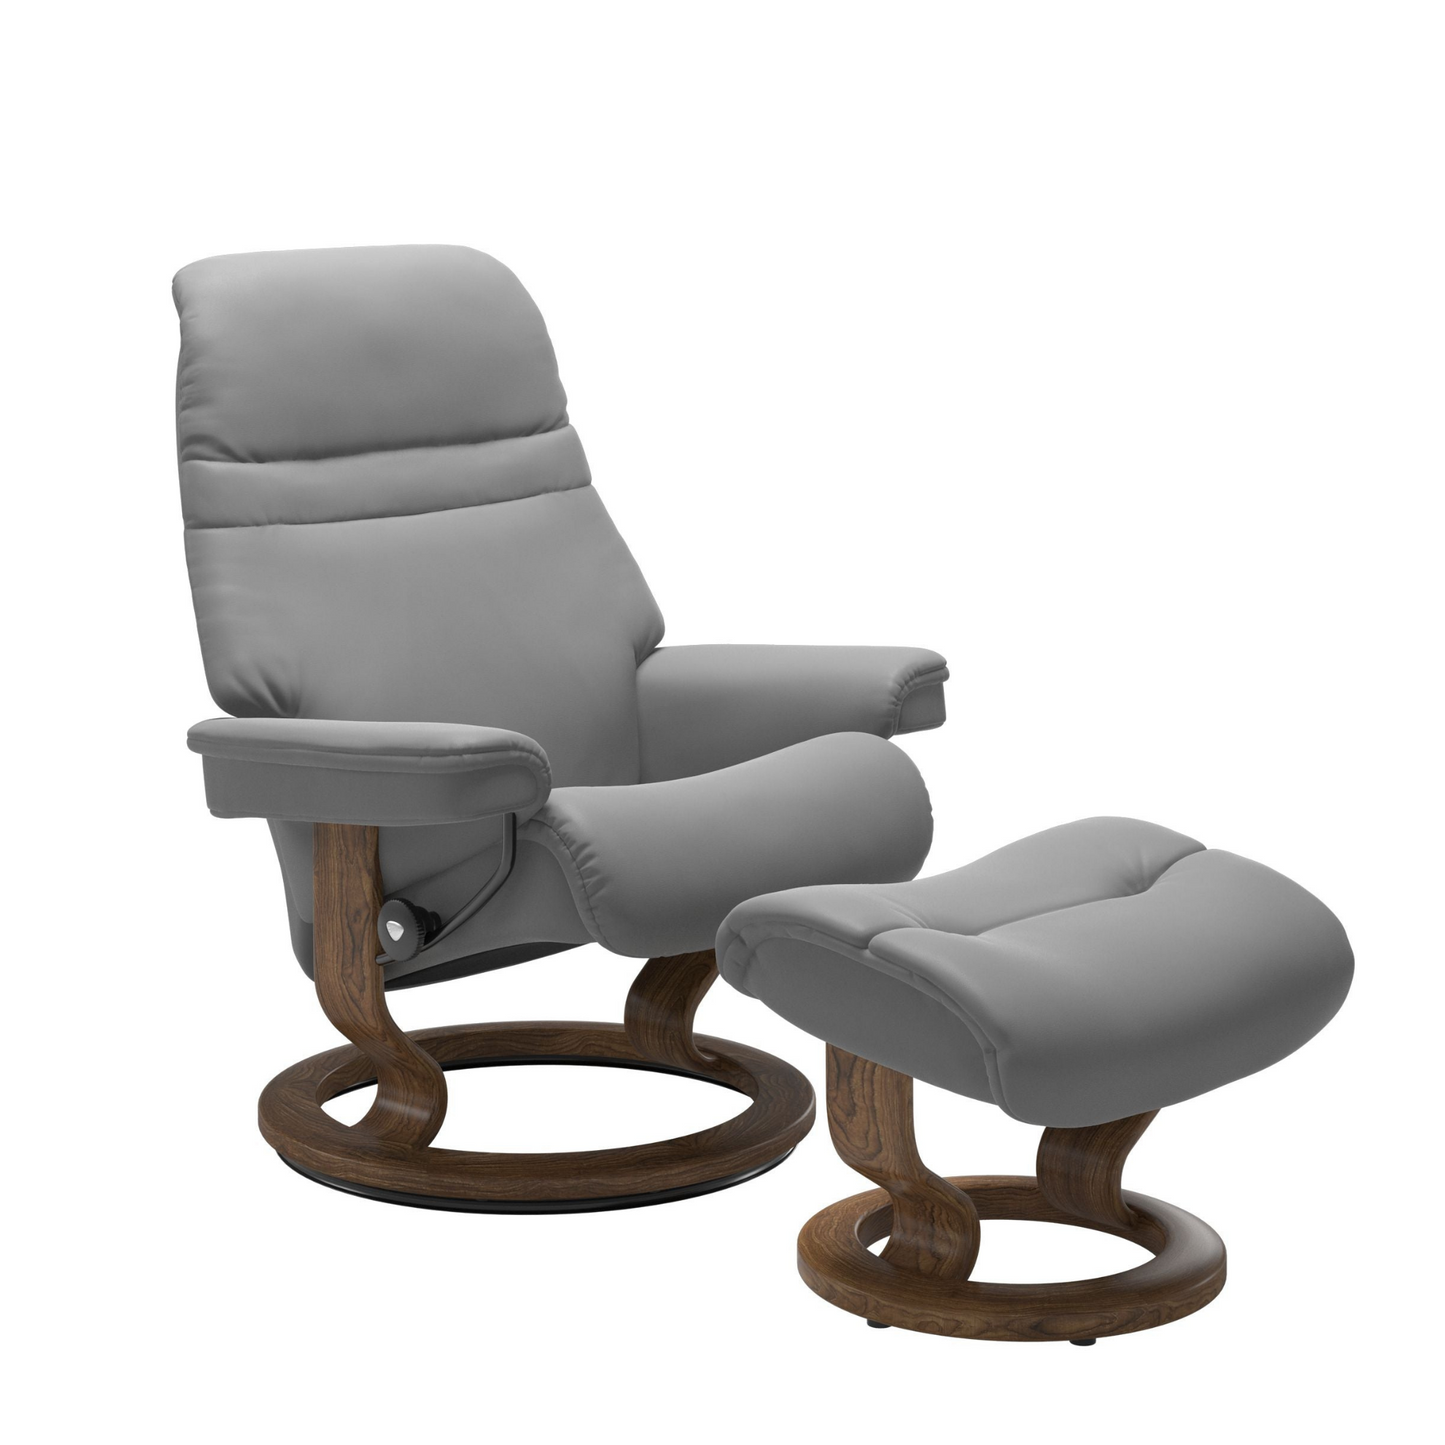 Sunrise Large Recliner Chair & Stool Classic Base by Stressless